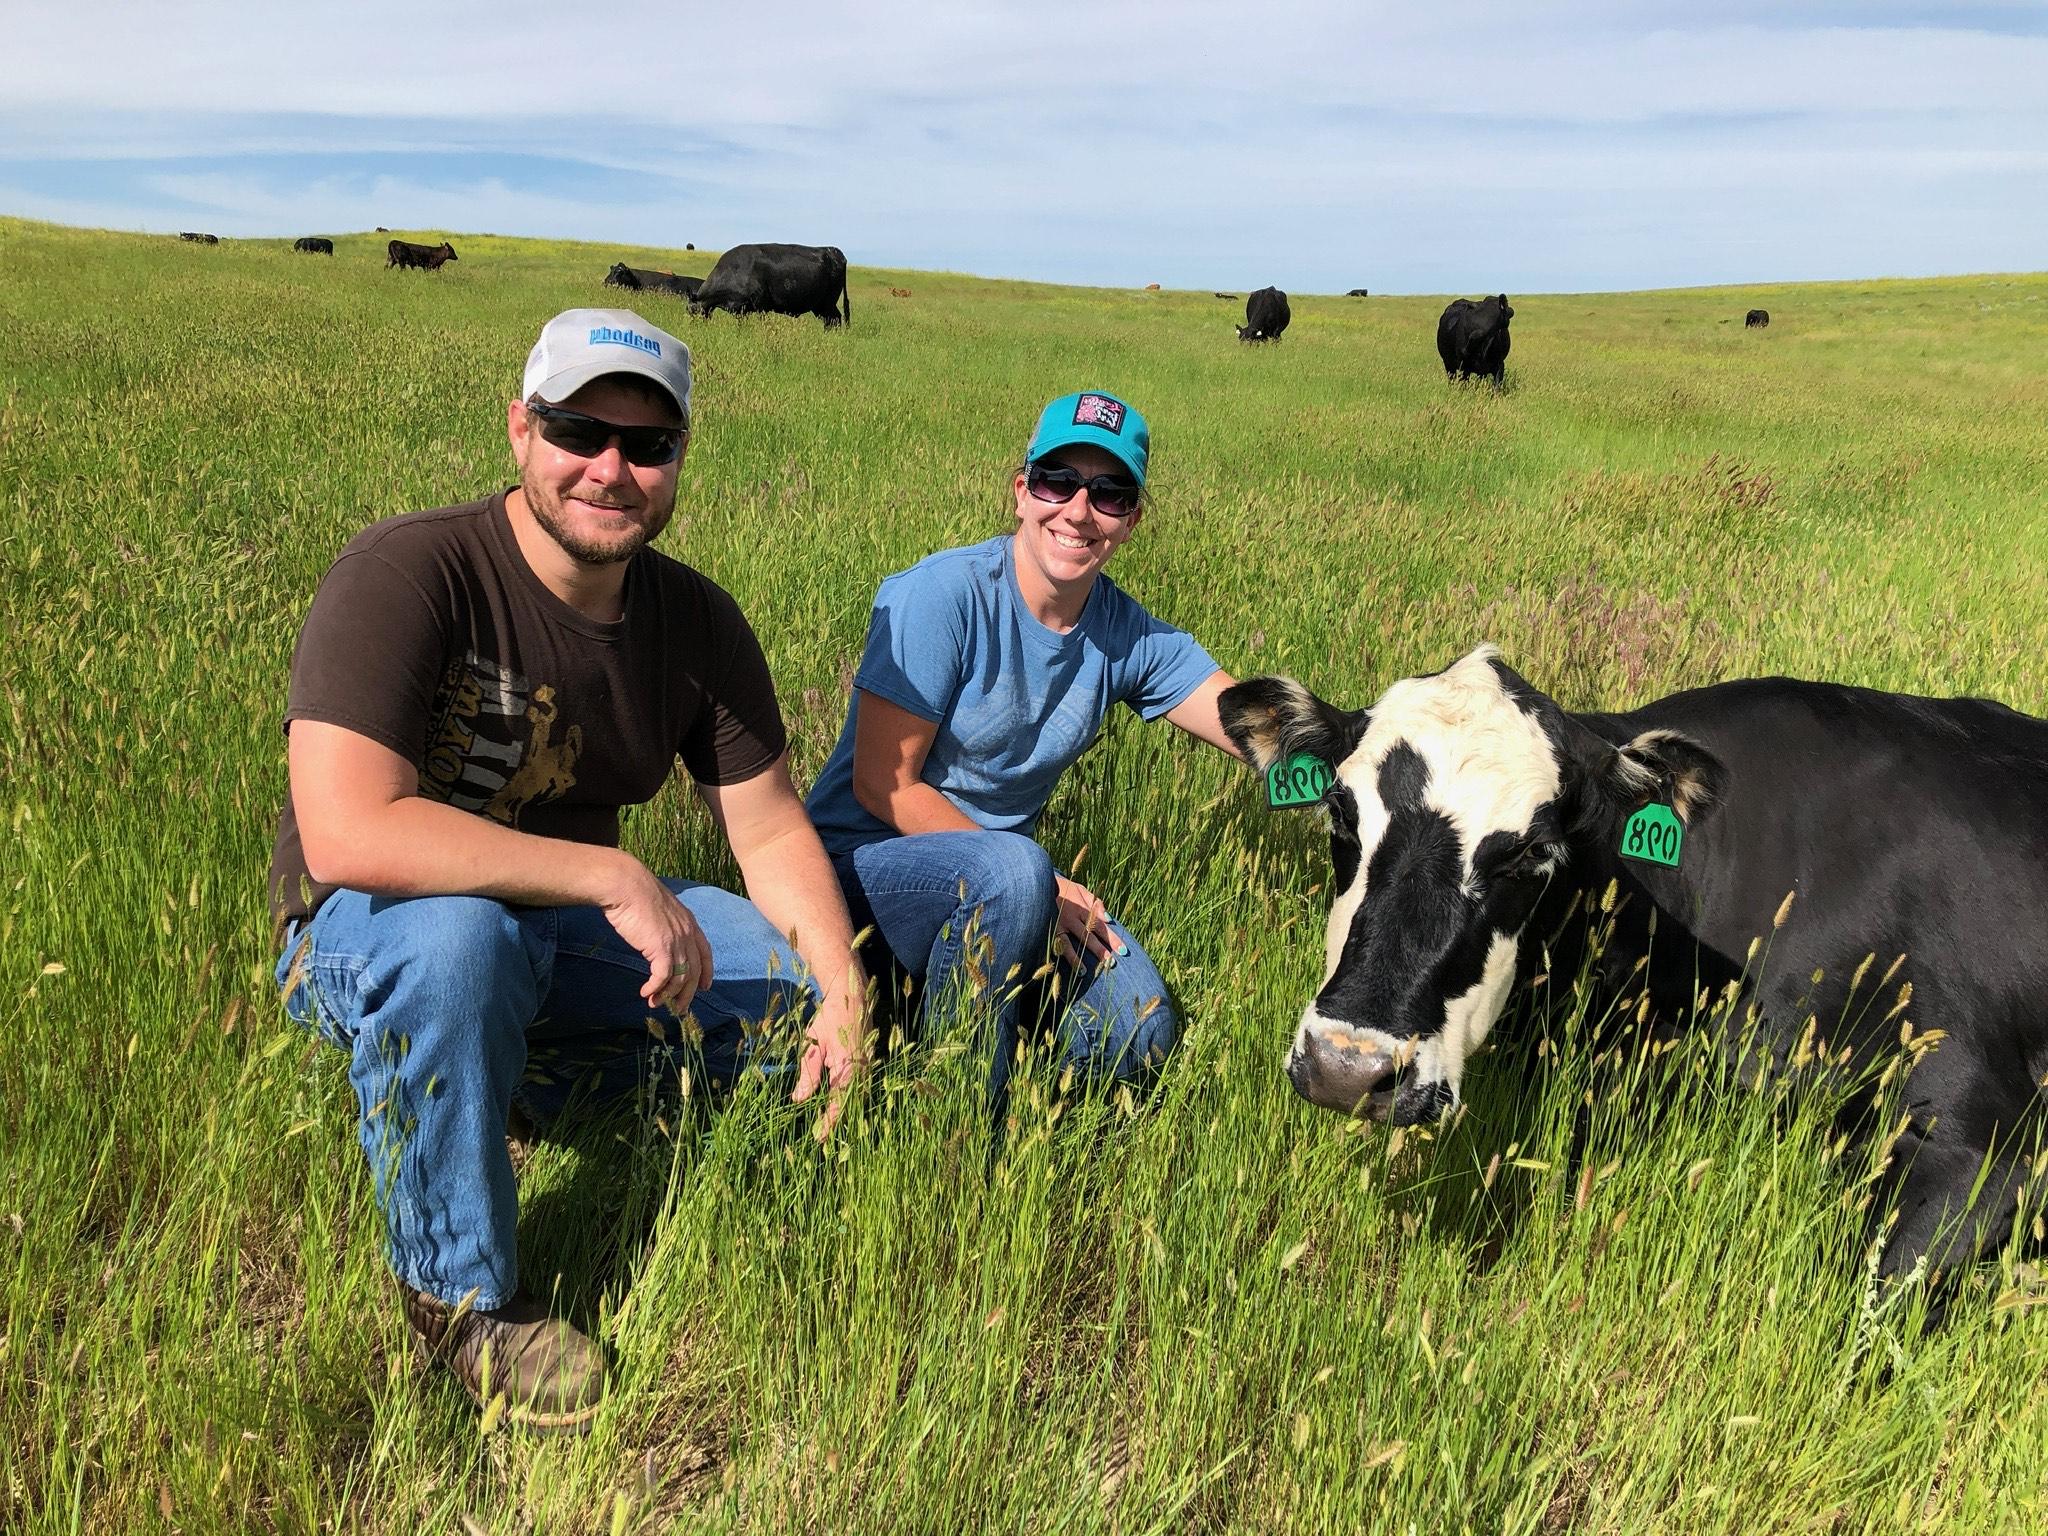 Student and instructor are in a field with livestock